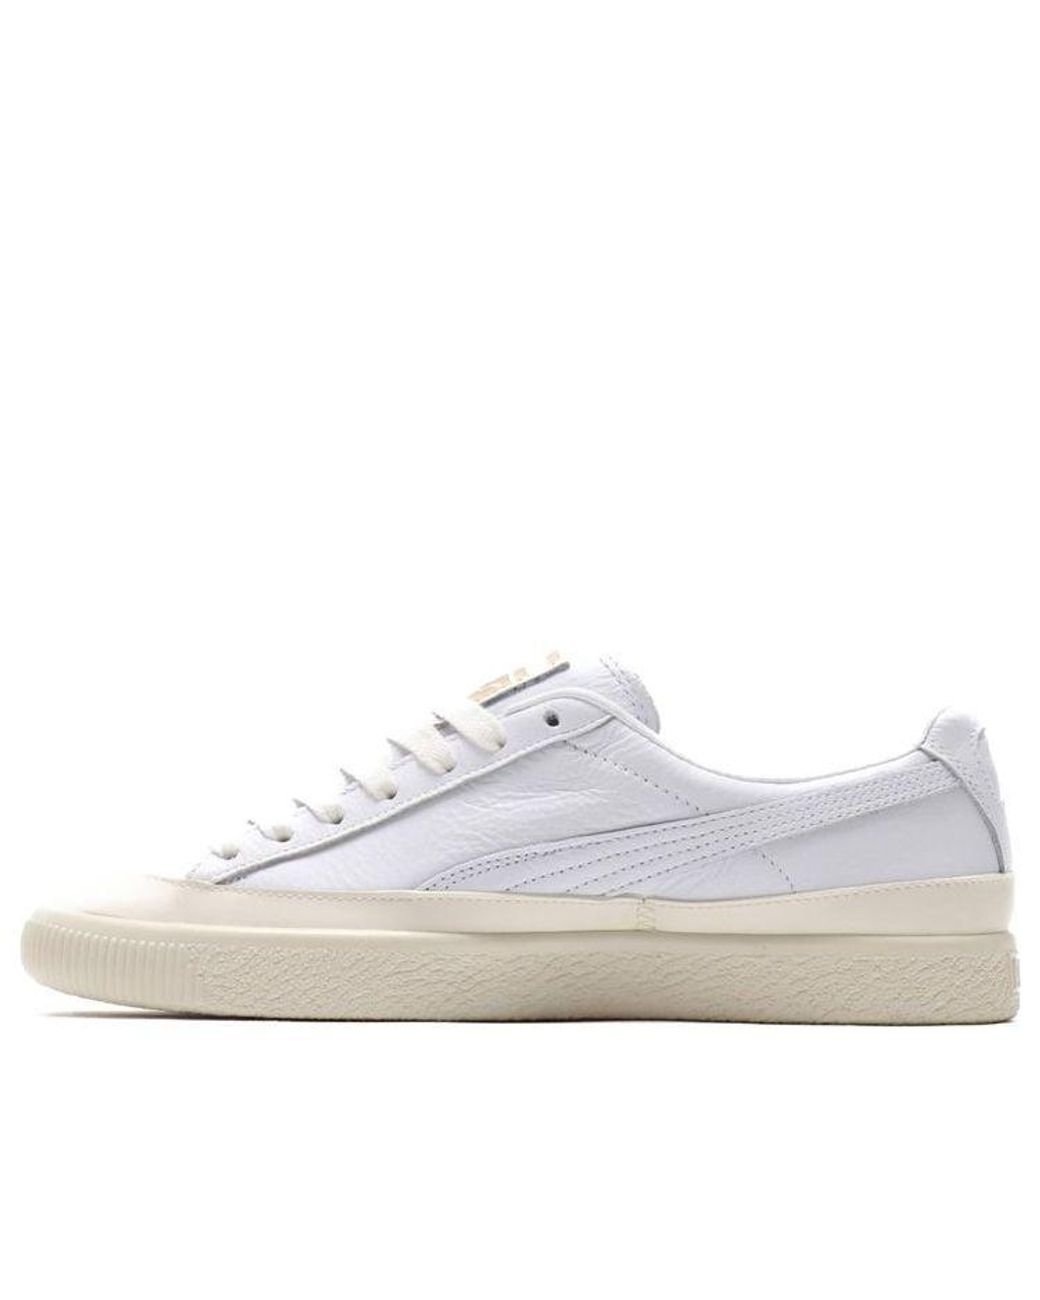 PUMA Clyde Rubber Toe Leather Leisure Board Shoes White Men | Lyst